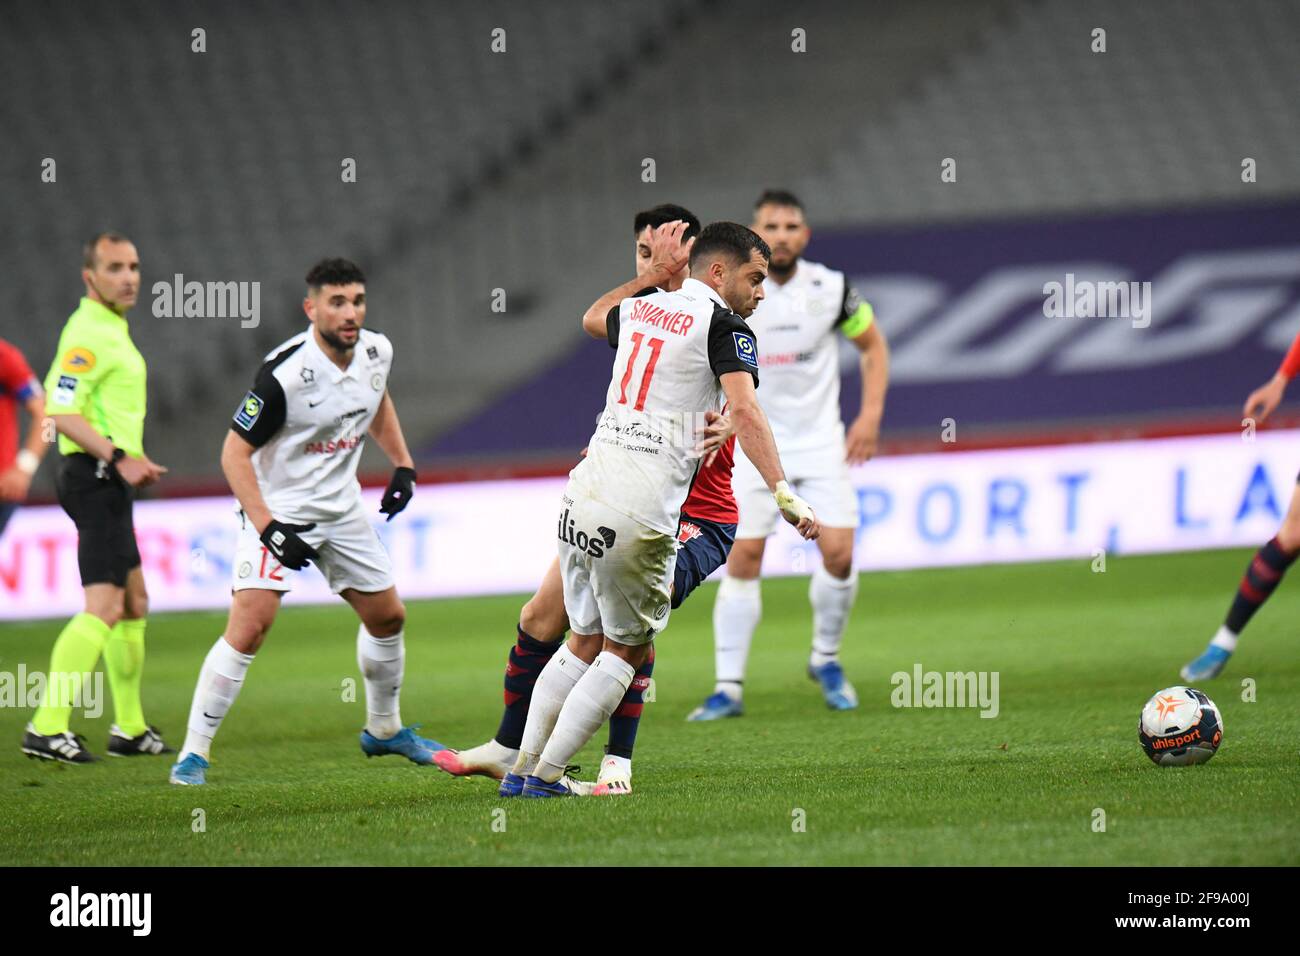 xxx during the French Ligue 1 football match between Lille (Losc) and  Montpellier (MHSC) at Stade Pierre Mauroy in Villeneuve dâÂ€Â™Ascq on April  16, 2021.Photo by Julie Sebadelha/ABACAPRESS.COM Stock Photo - Alamy